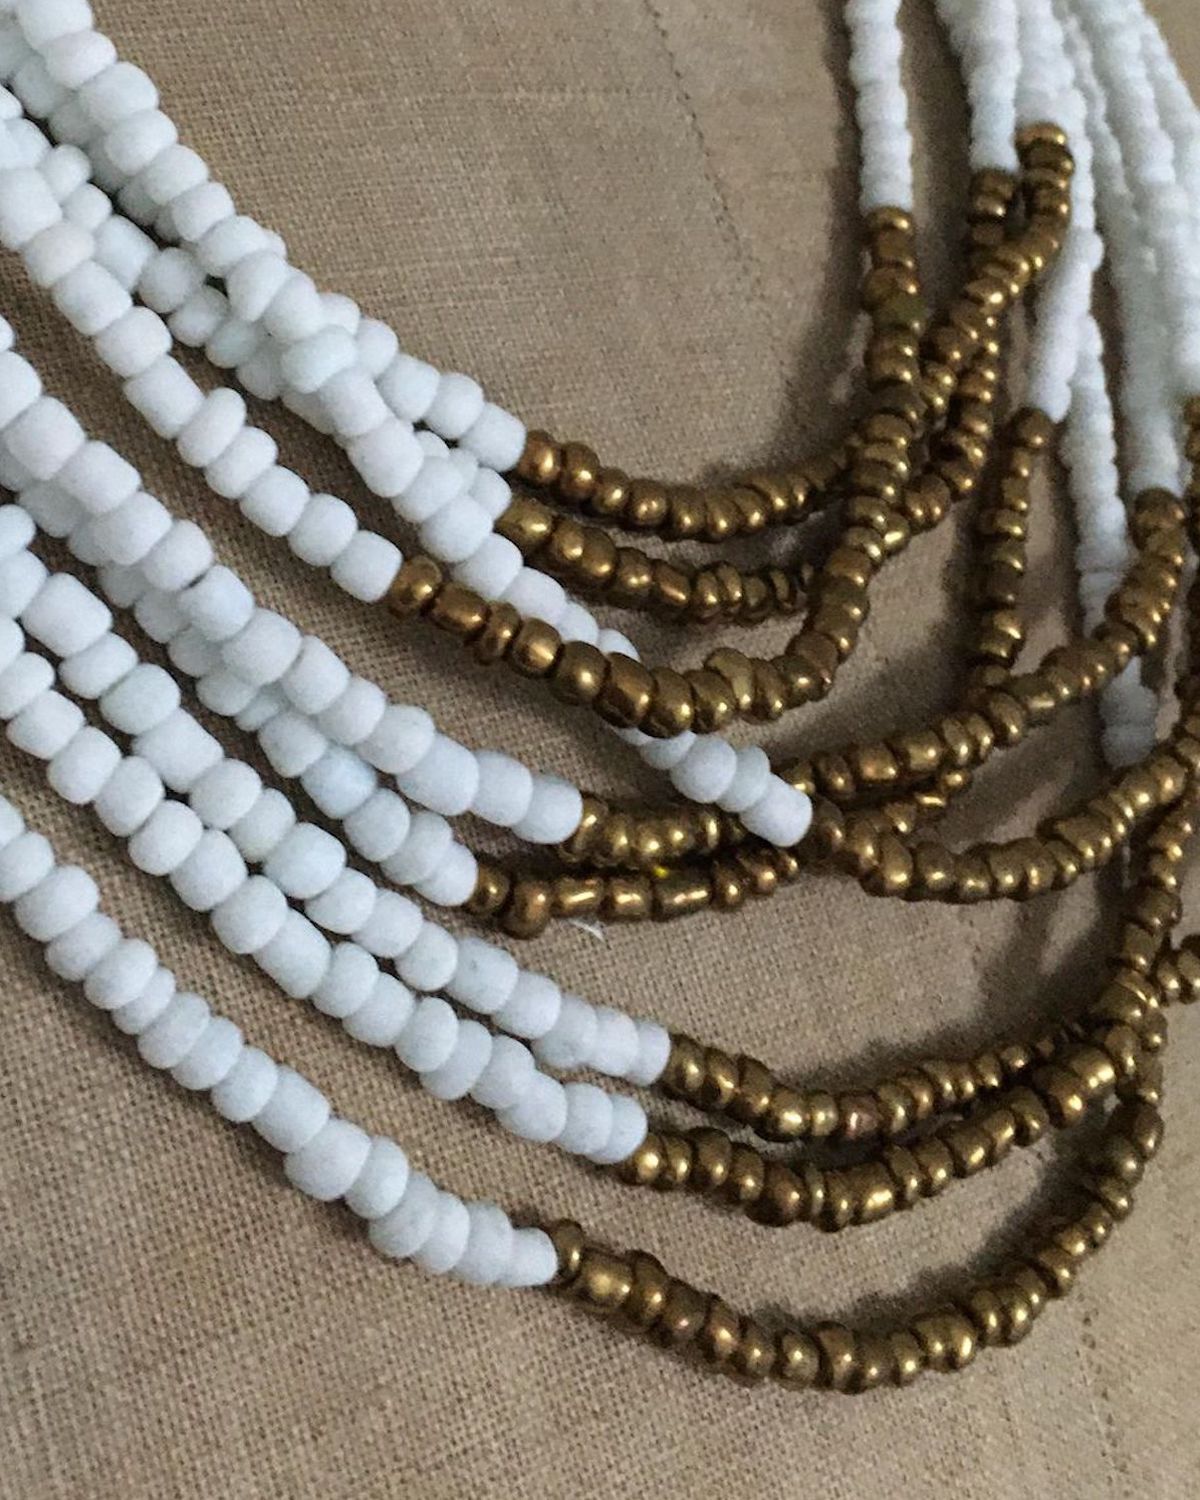 White Opaque Glass Bead Necklace with Bronze Accent